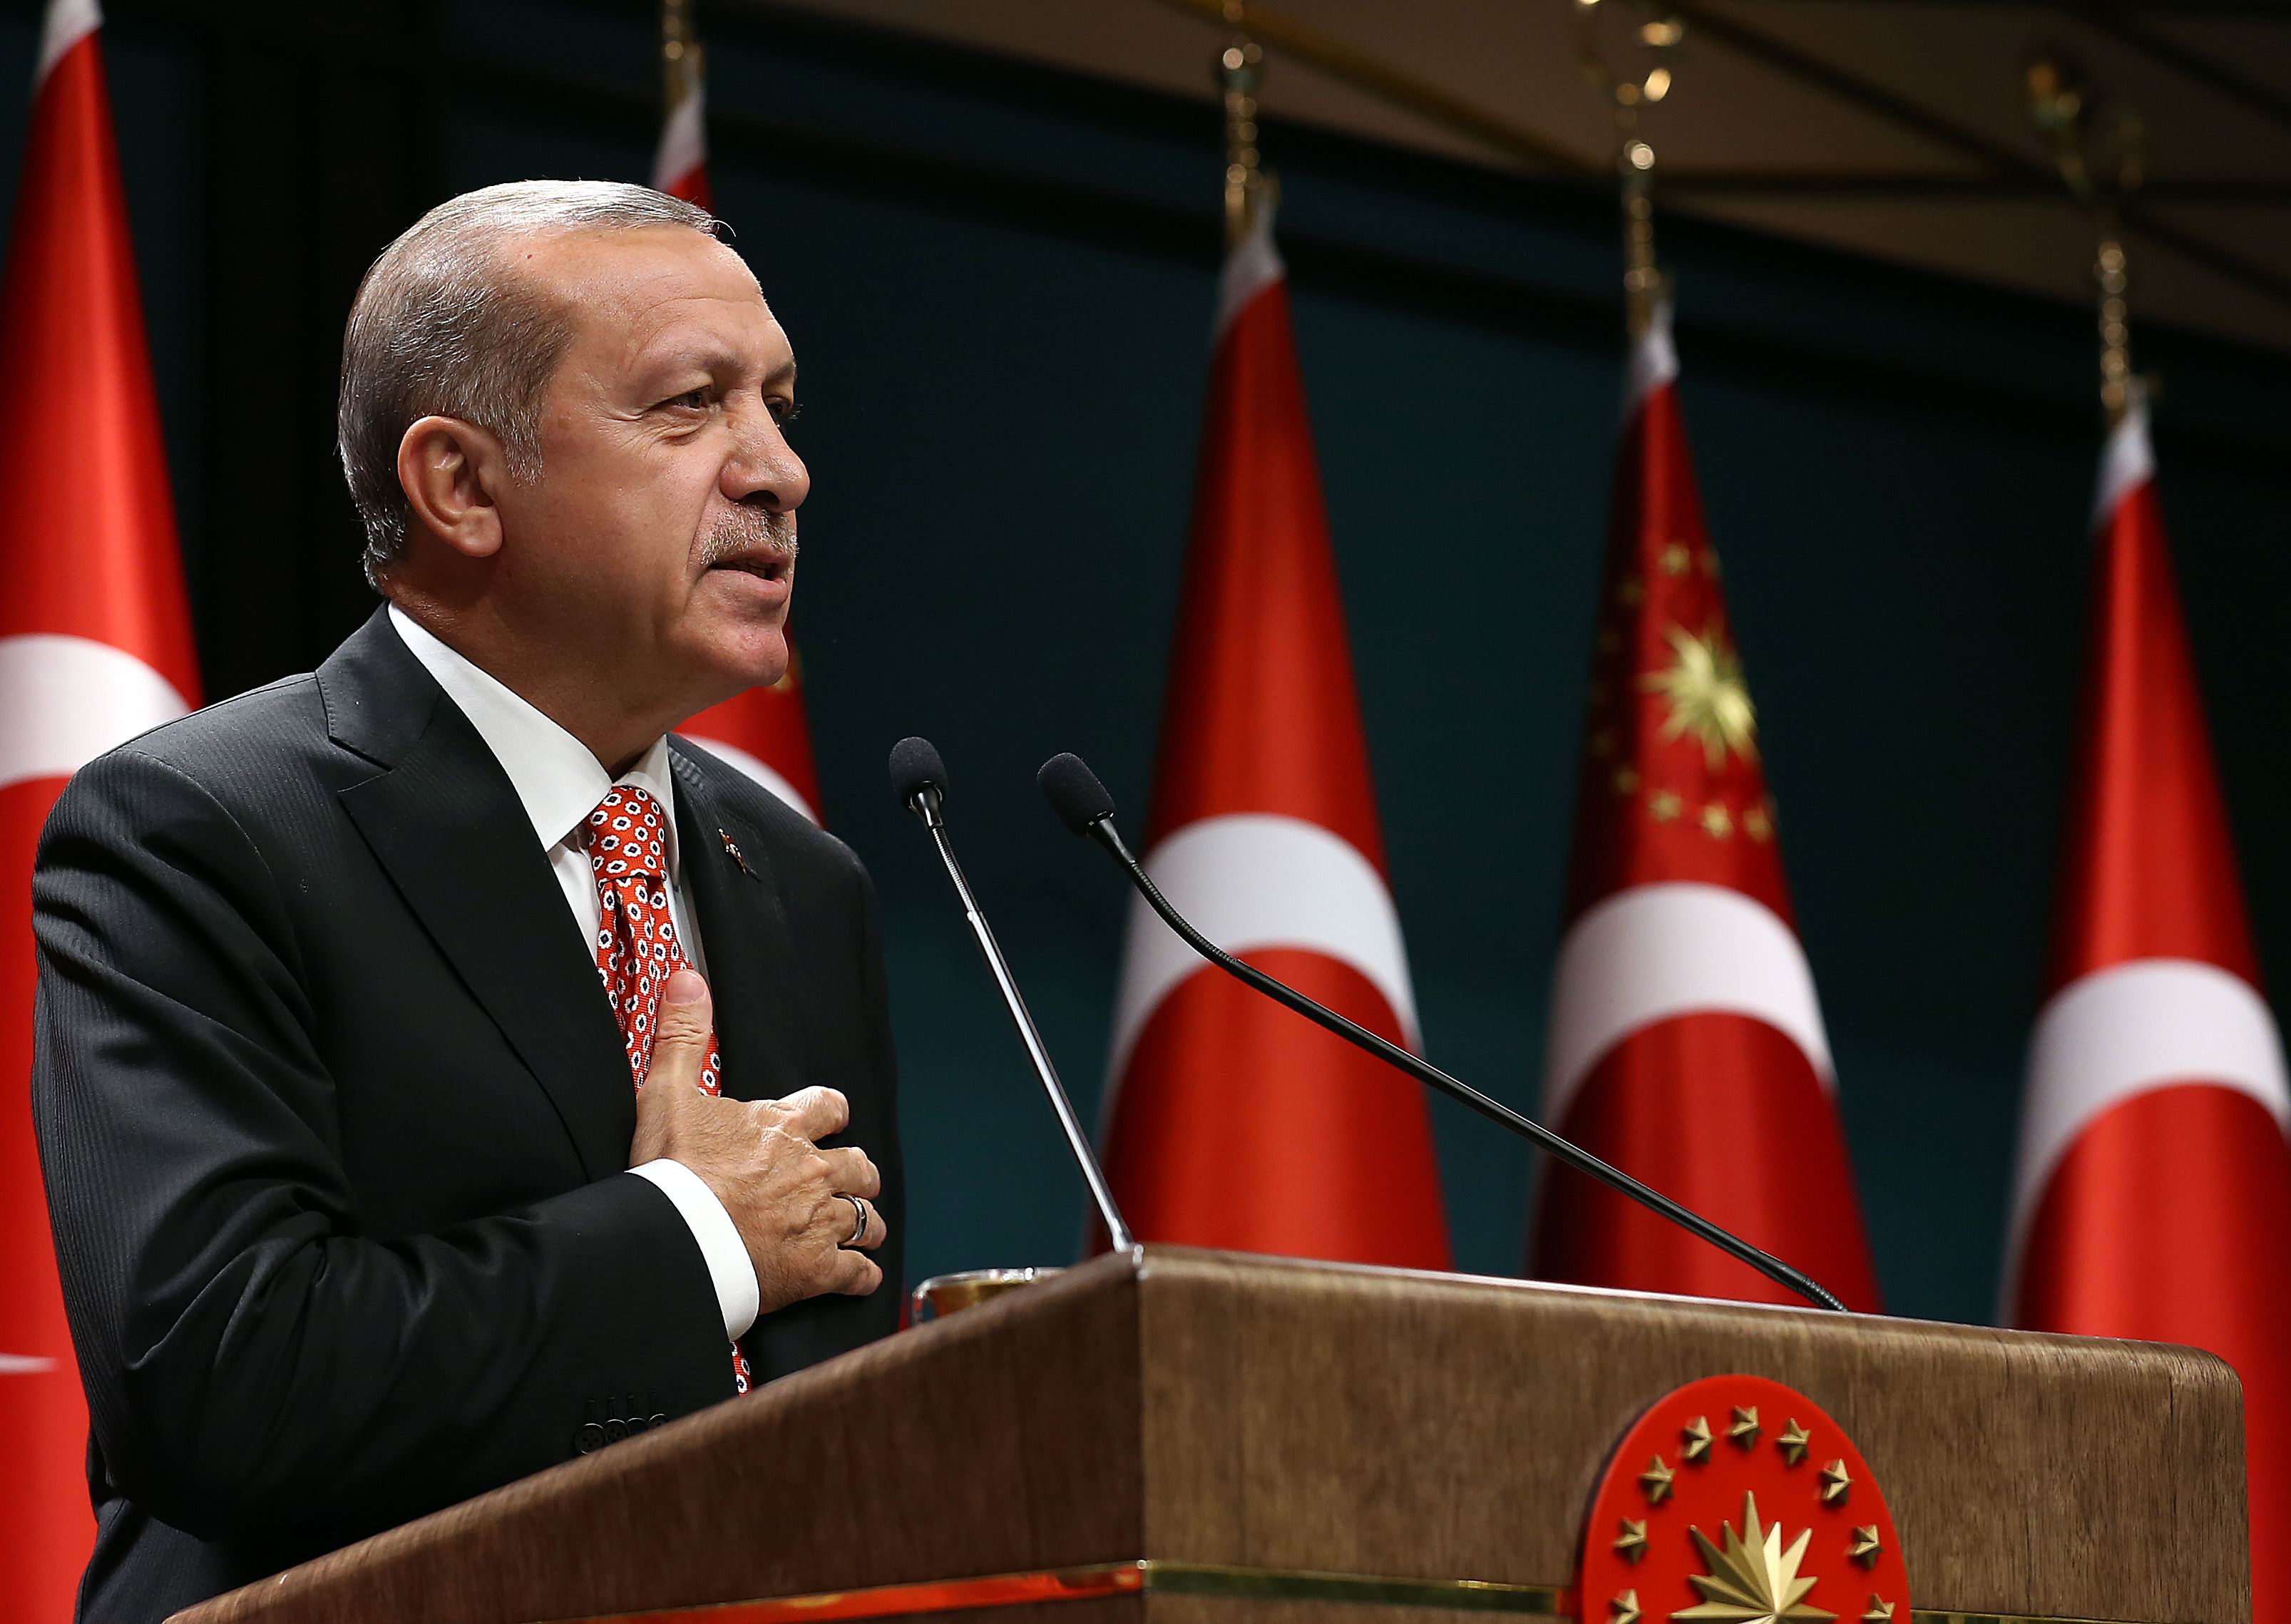 Turkey keen for mention in G20 communique, but rejected